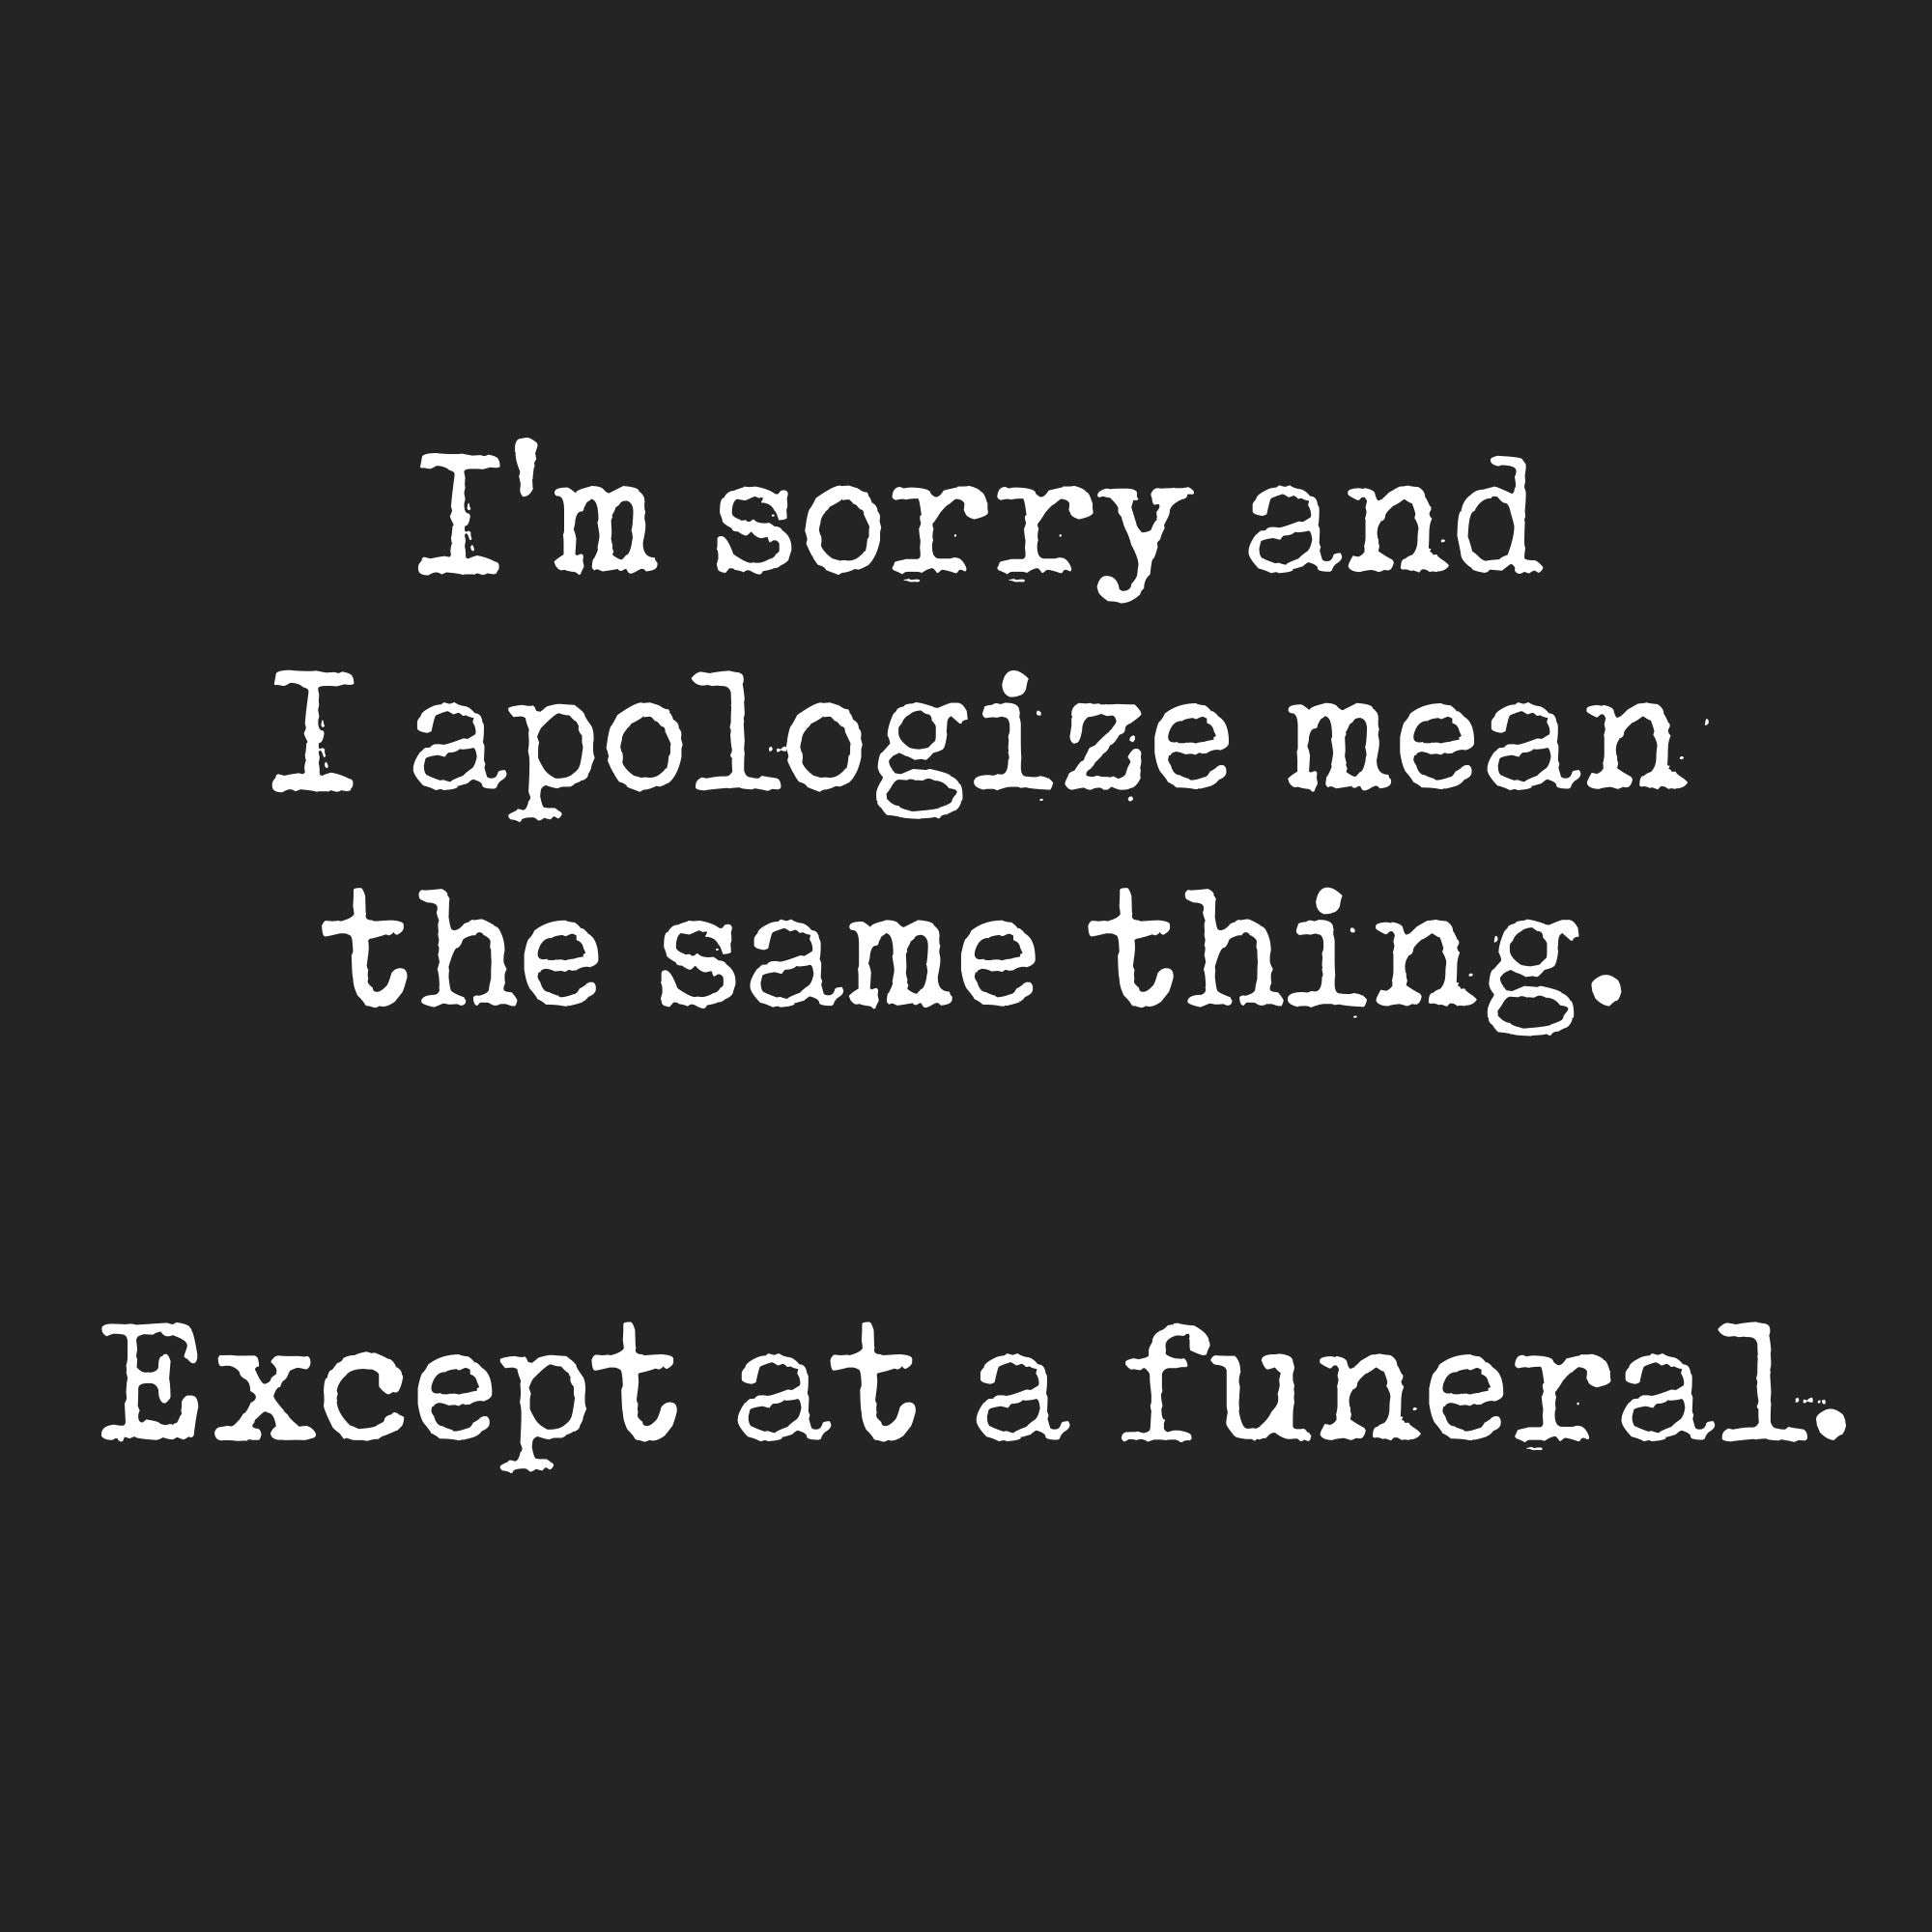 Funny Heather Black I'm Sorry And I Apologize At A Funeral Womens T Shirt Nerdy Sarcastic Nerdy Tee